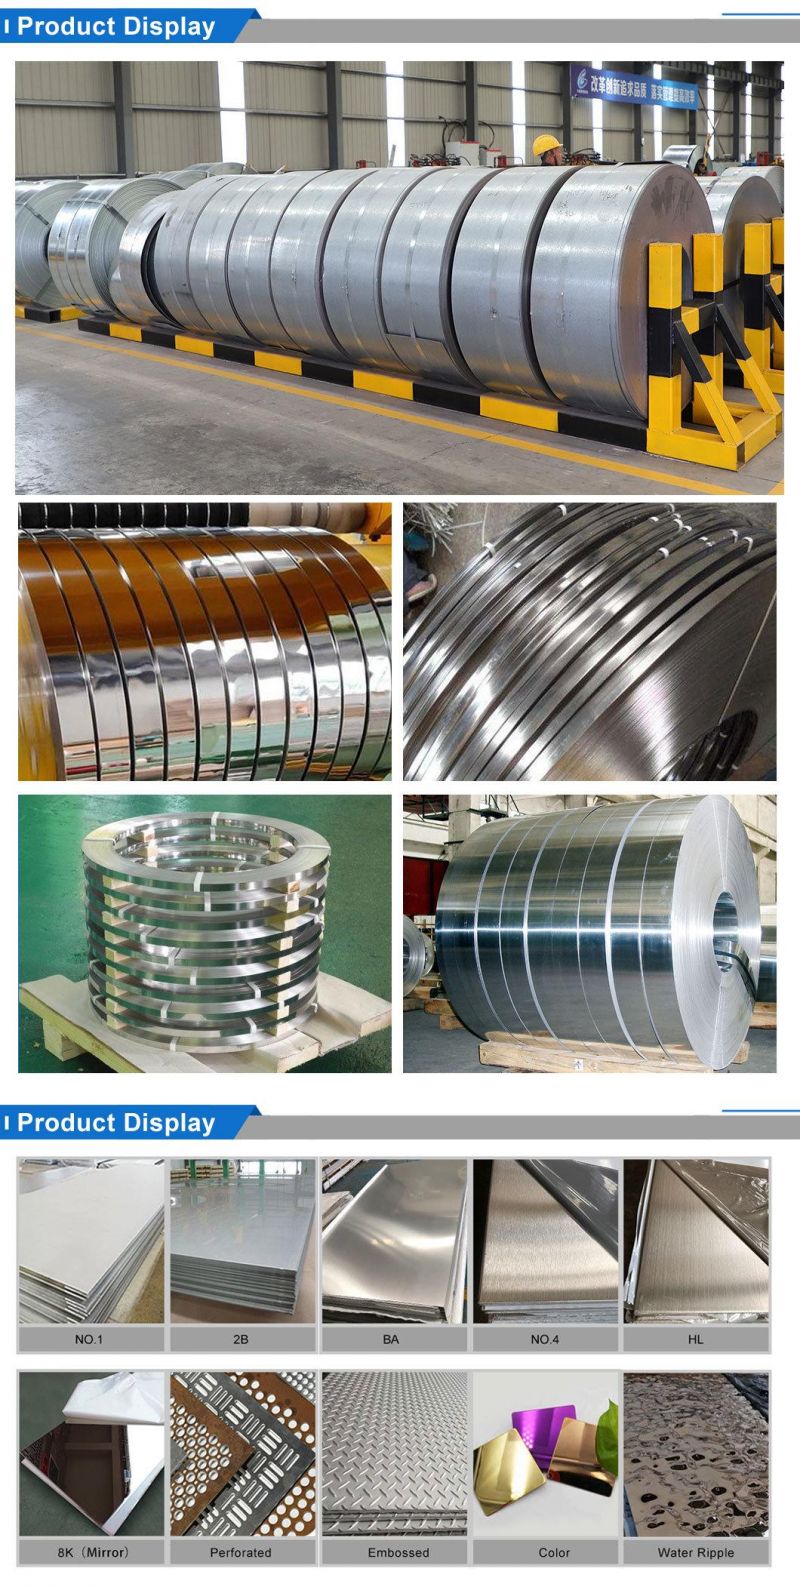 Factory Produces a Variety of Cold Rolled Carbon Stainless Steel Tape Strip